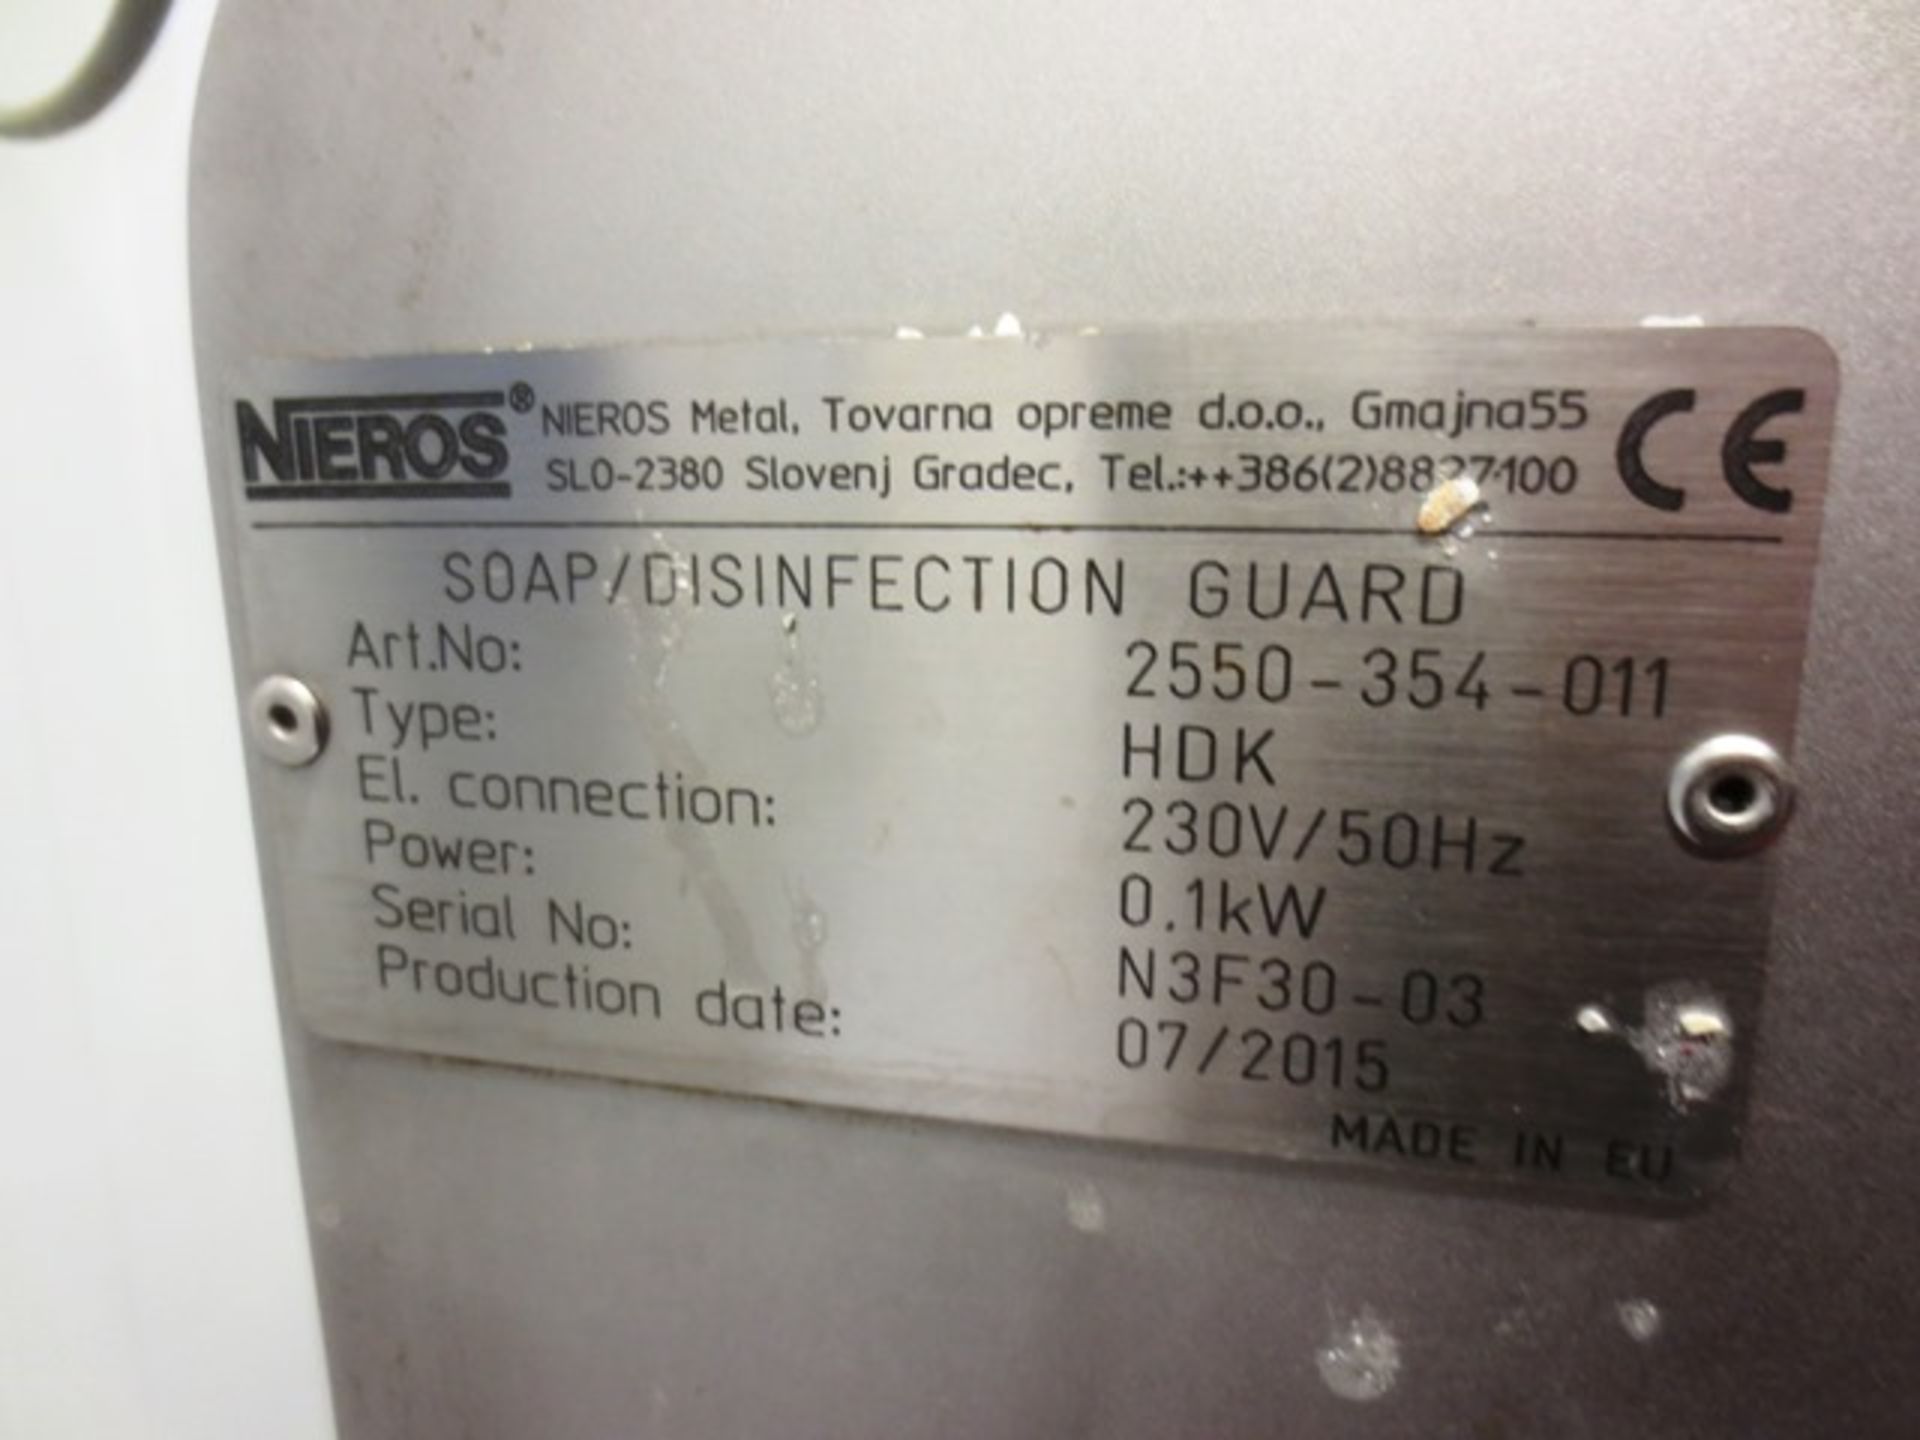 Nieros Stainless steel enclosed soap and disinfection dispensing station, type HDK (2015) - Image 2 of 2